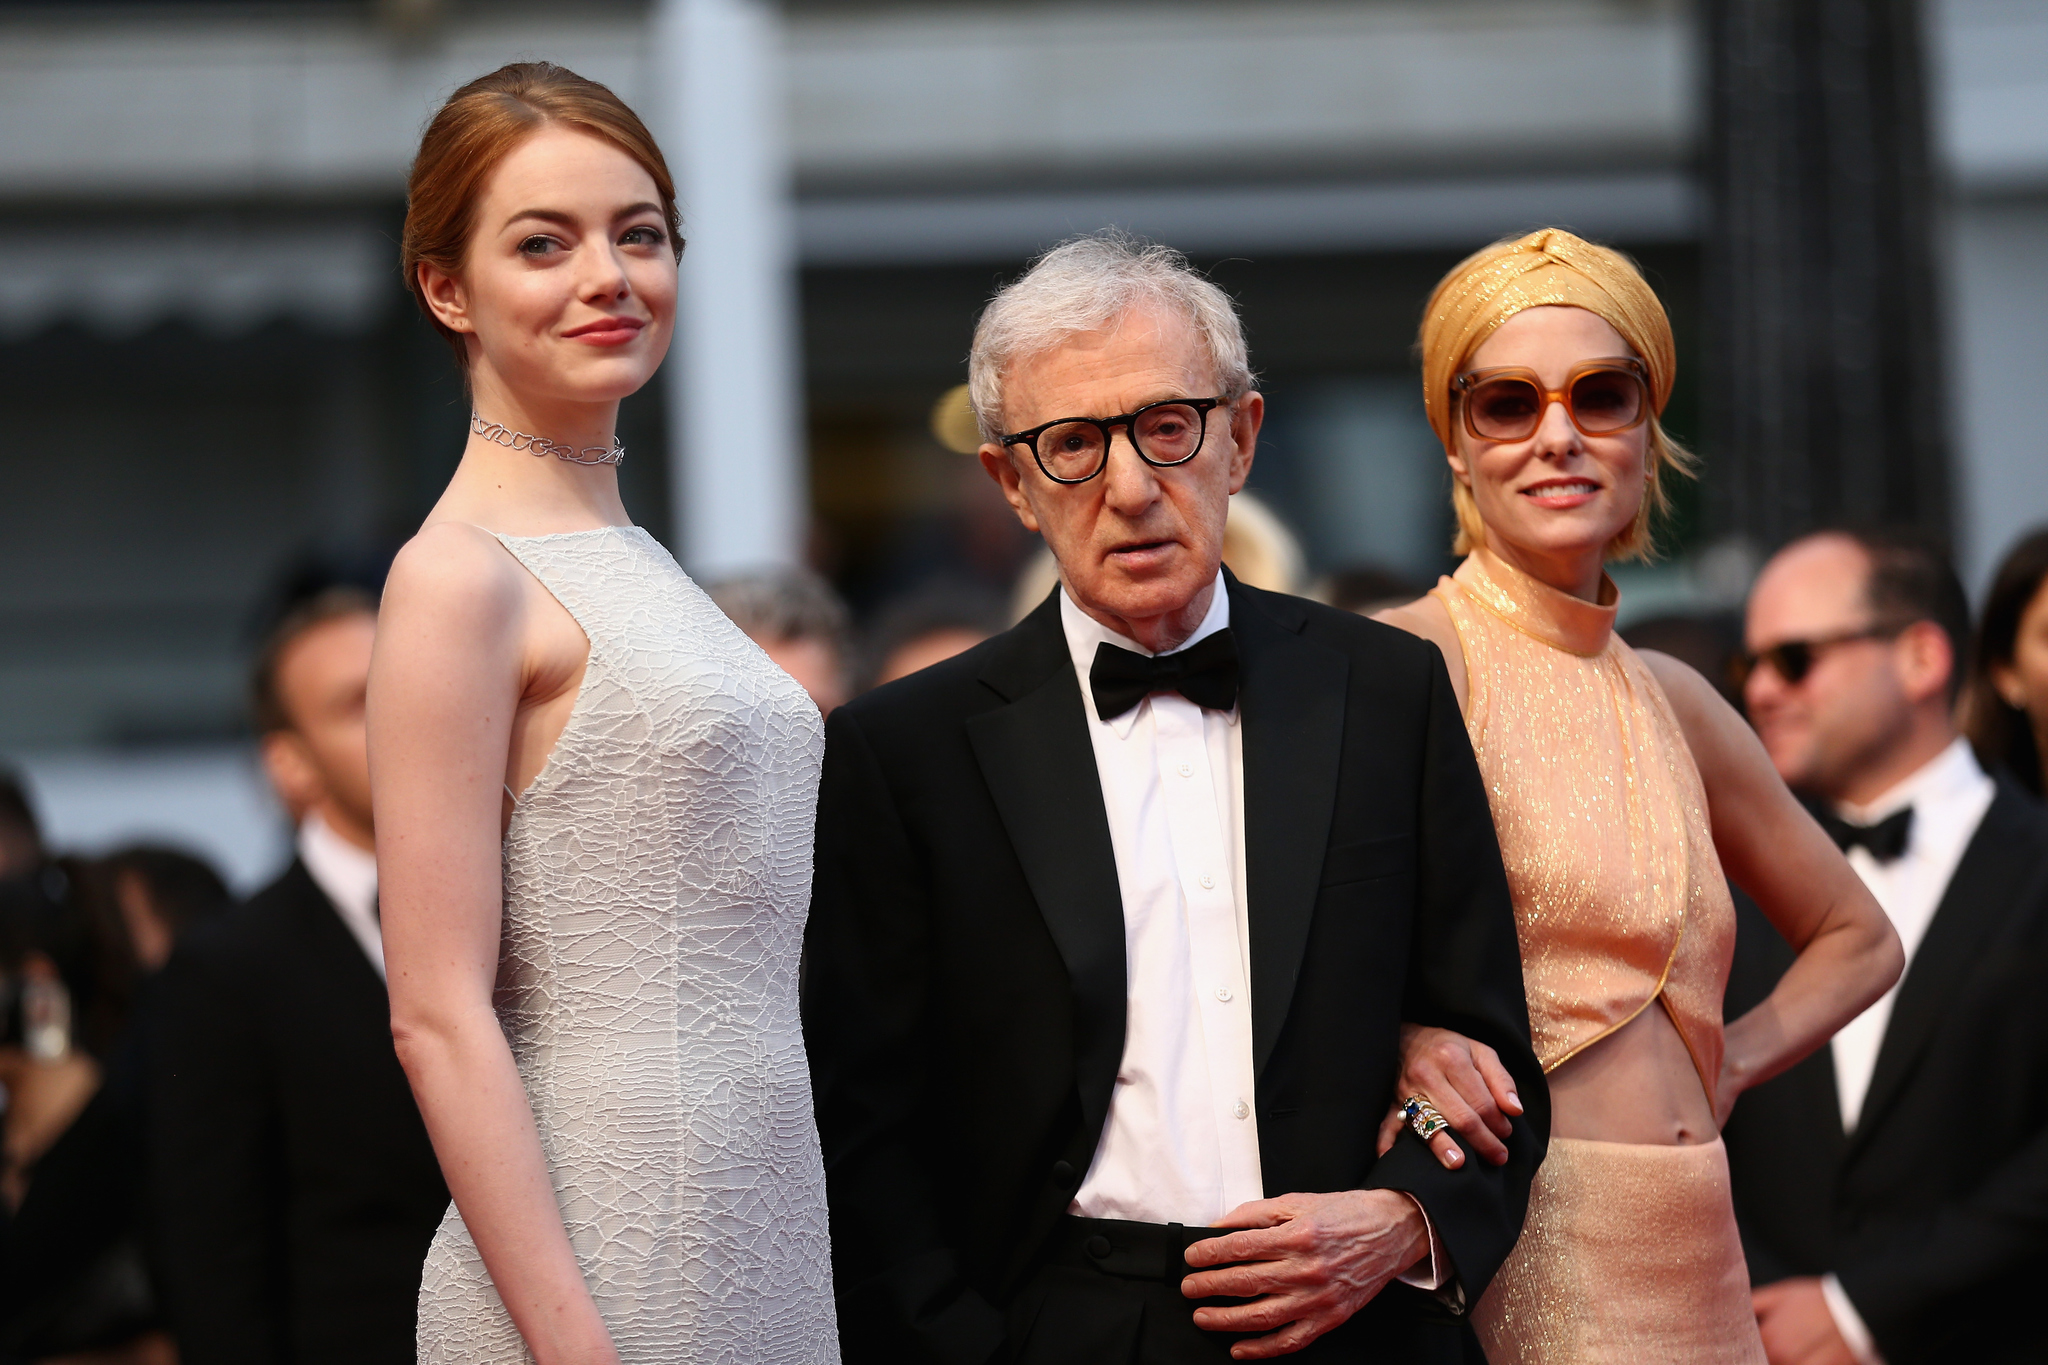 Woody Allen, Parker Posey and Emma Stone at event of Neracionalus zmogus (2015)